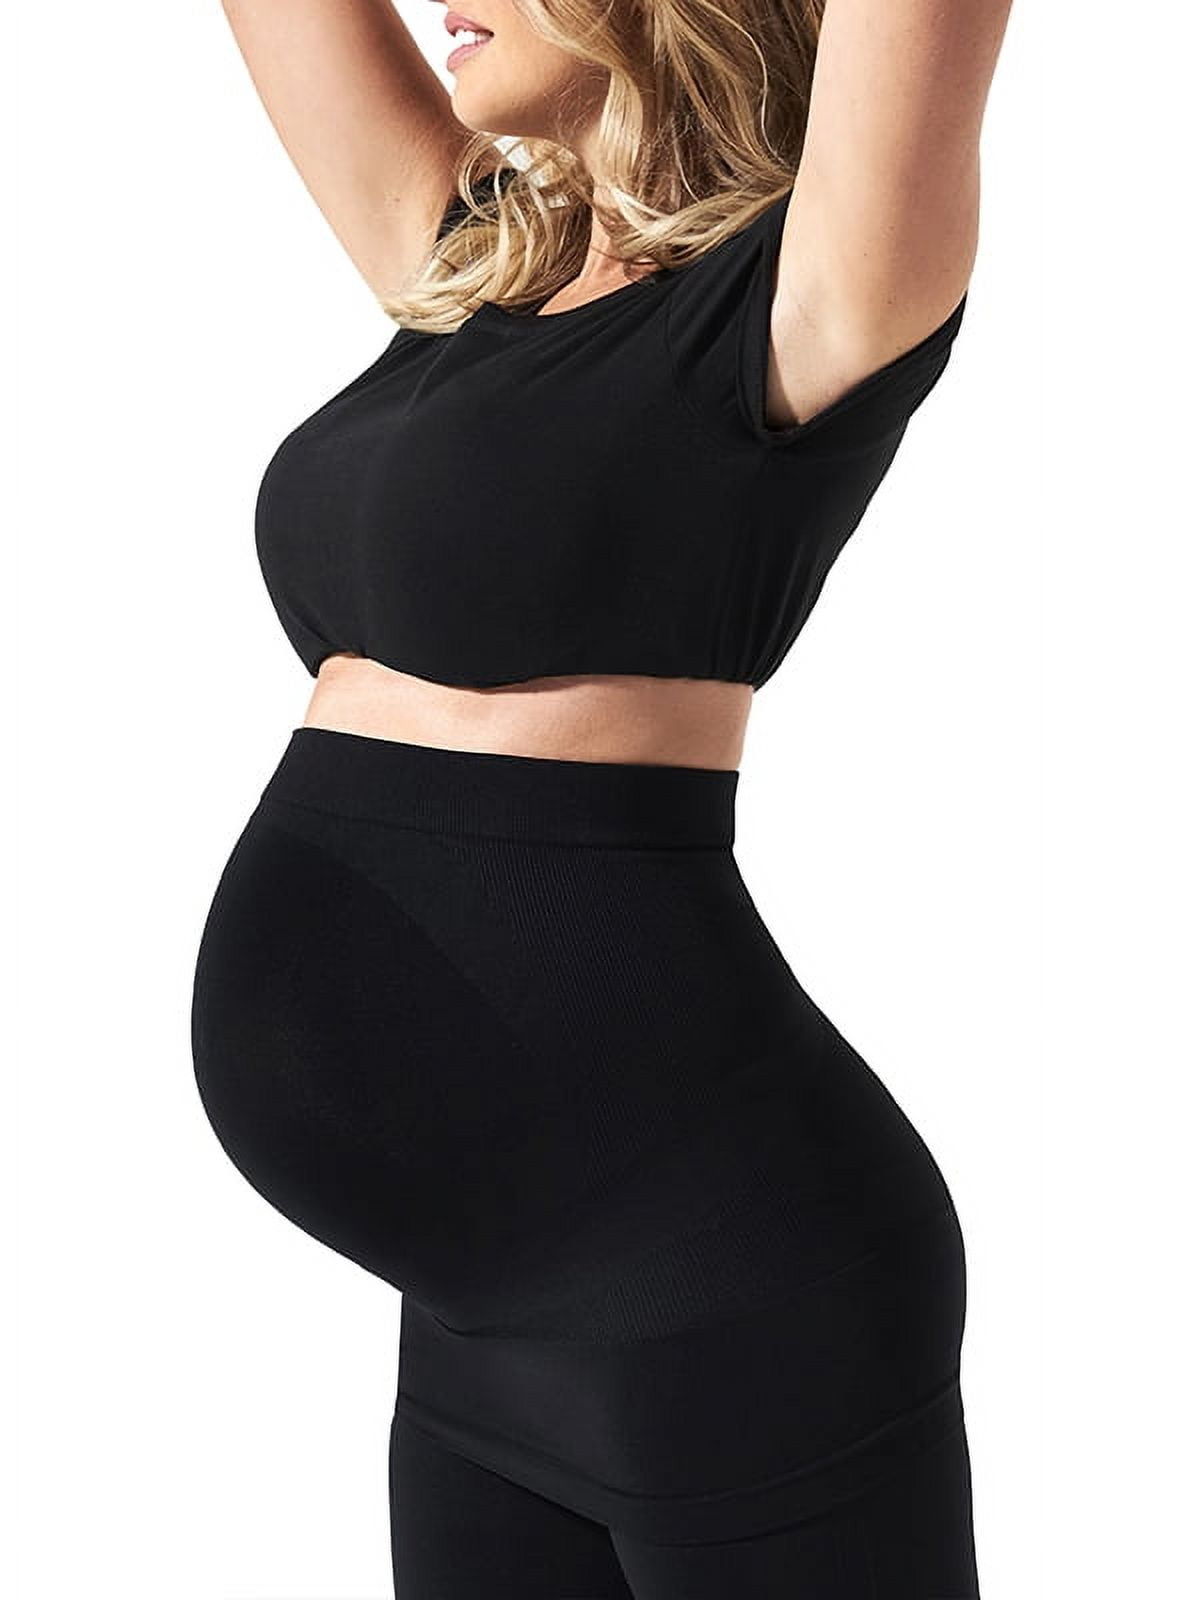 MUSIDORA Maternity Belly Band Pants Extender for Pregnant Women